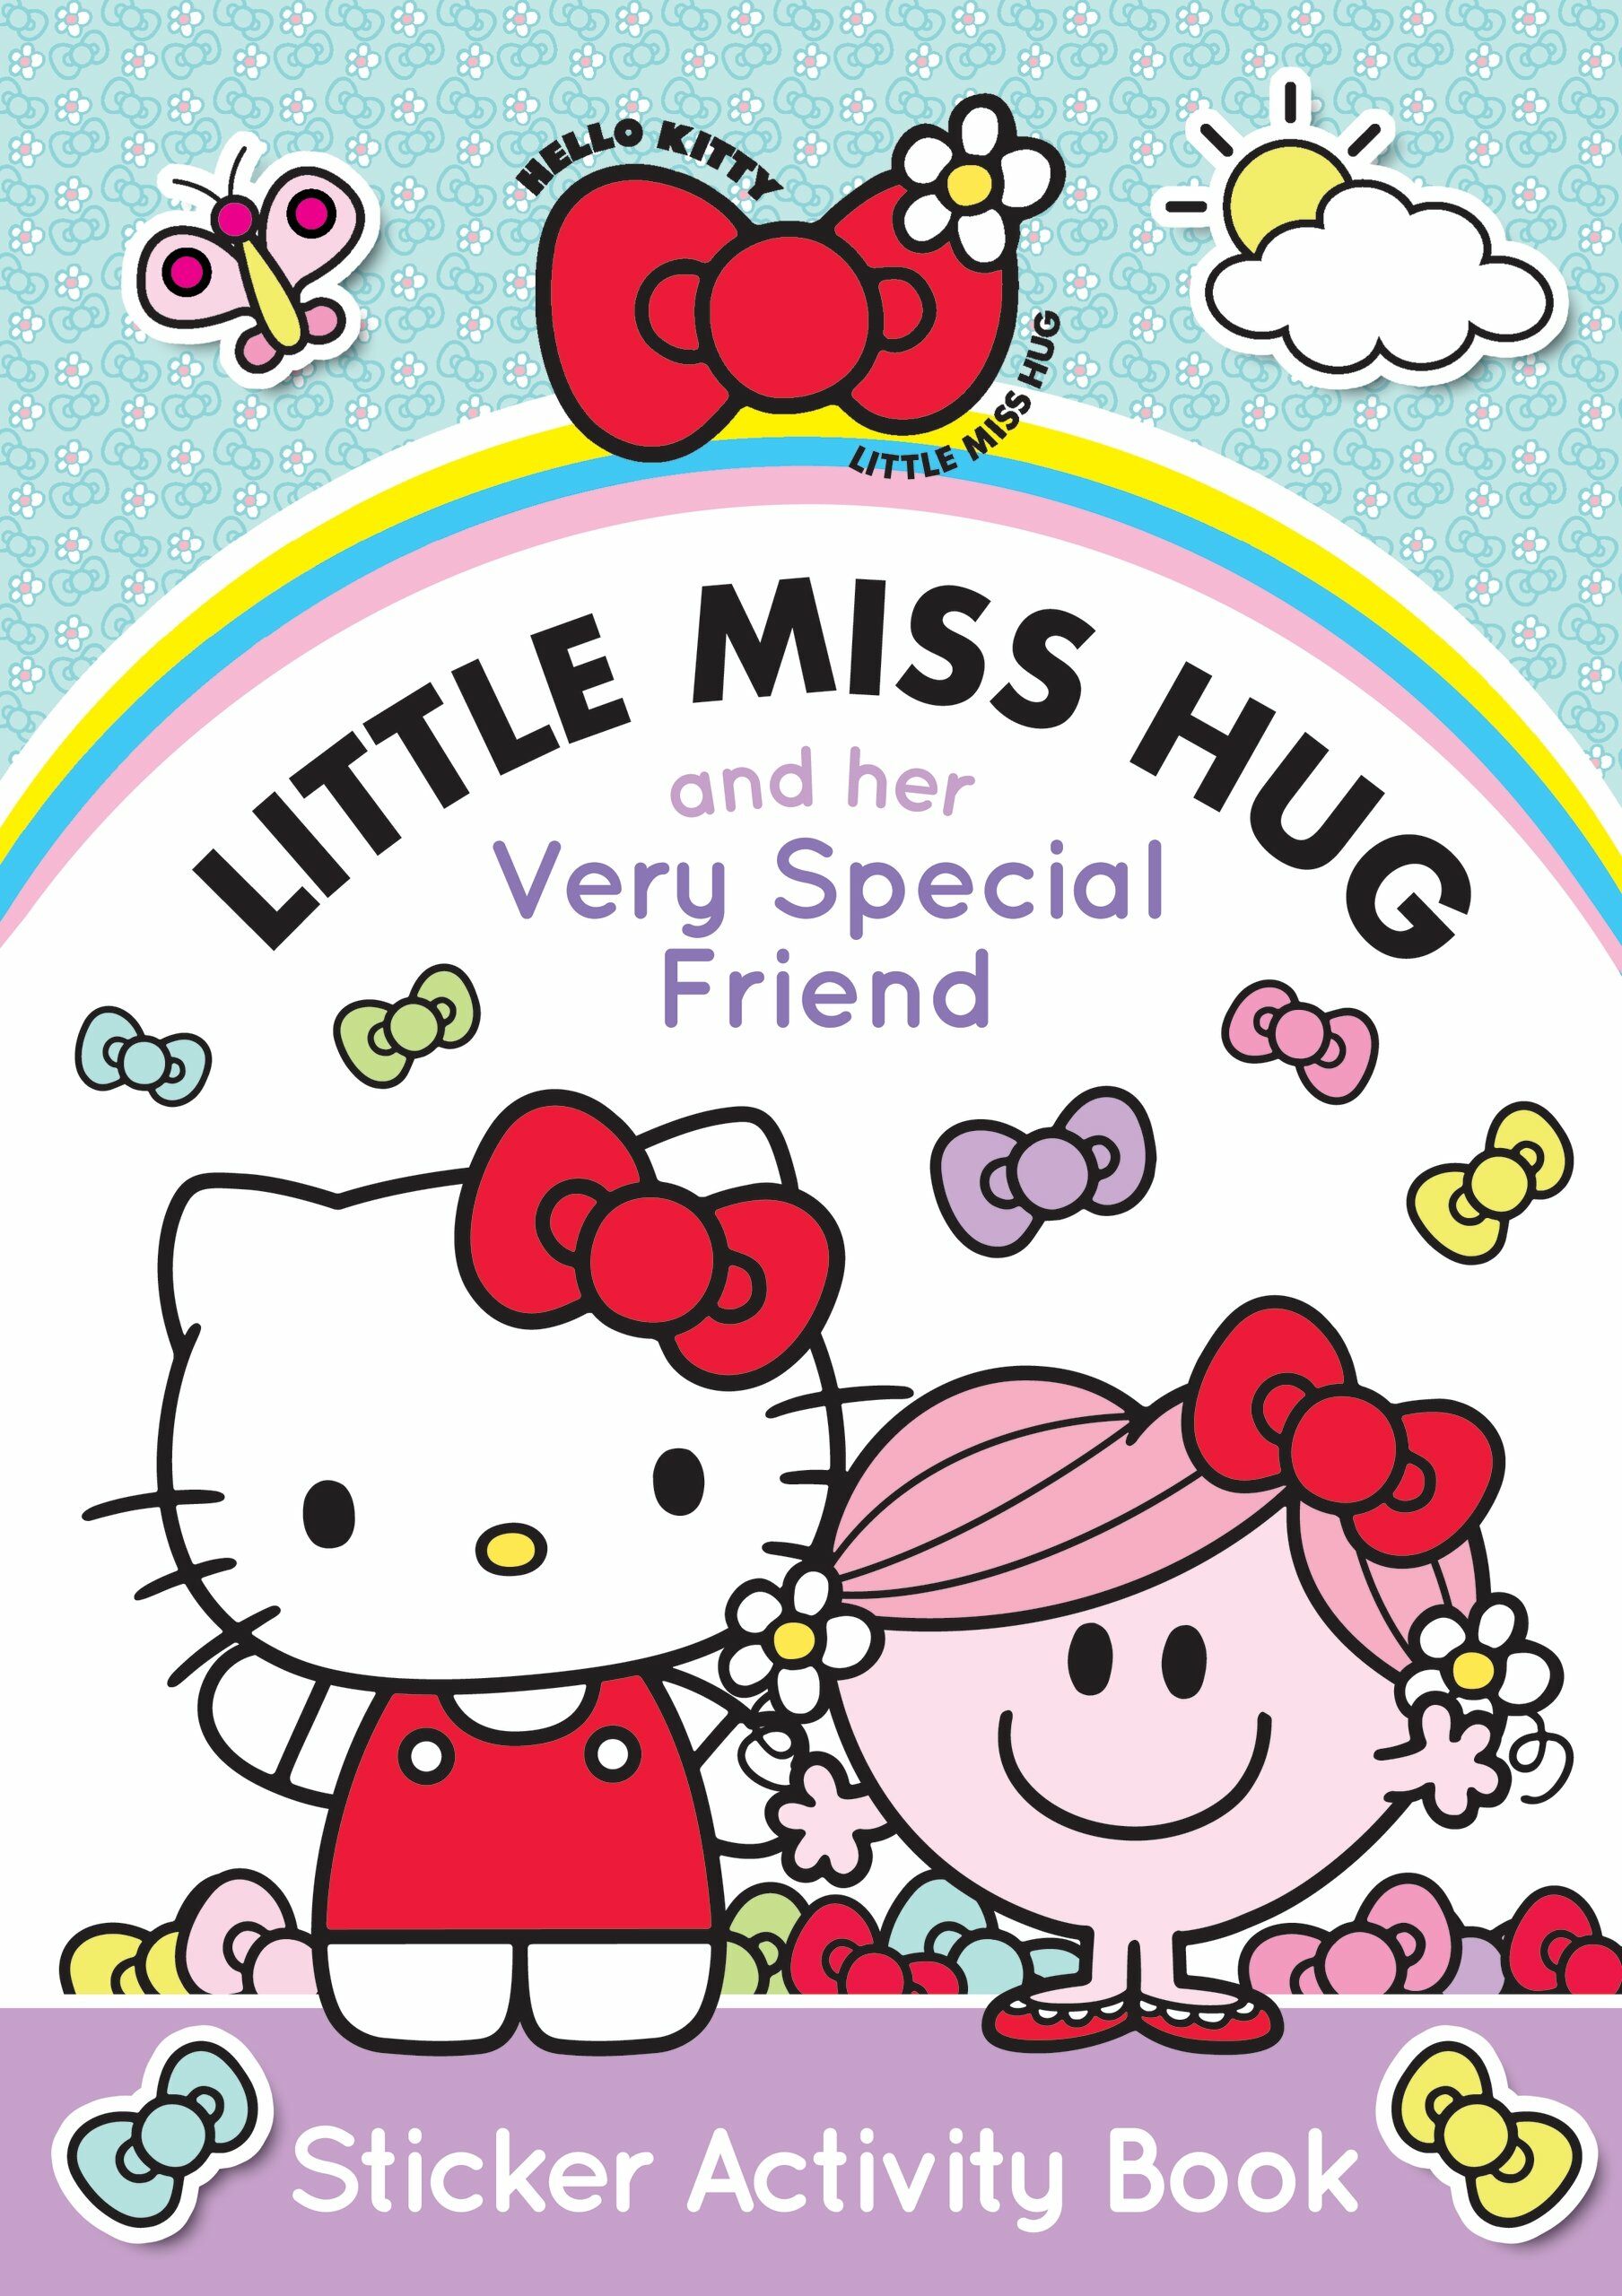 Little Miss Hug and Her Very Special Friend : Sticker Activity Book (Paperback)